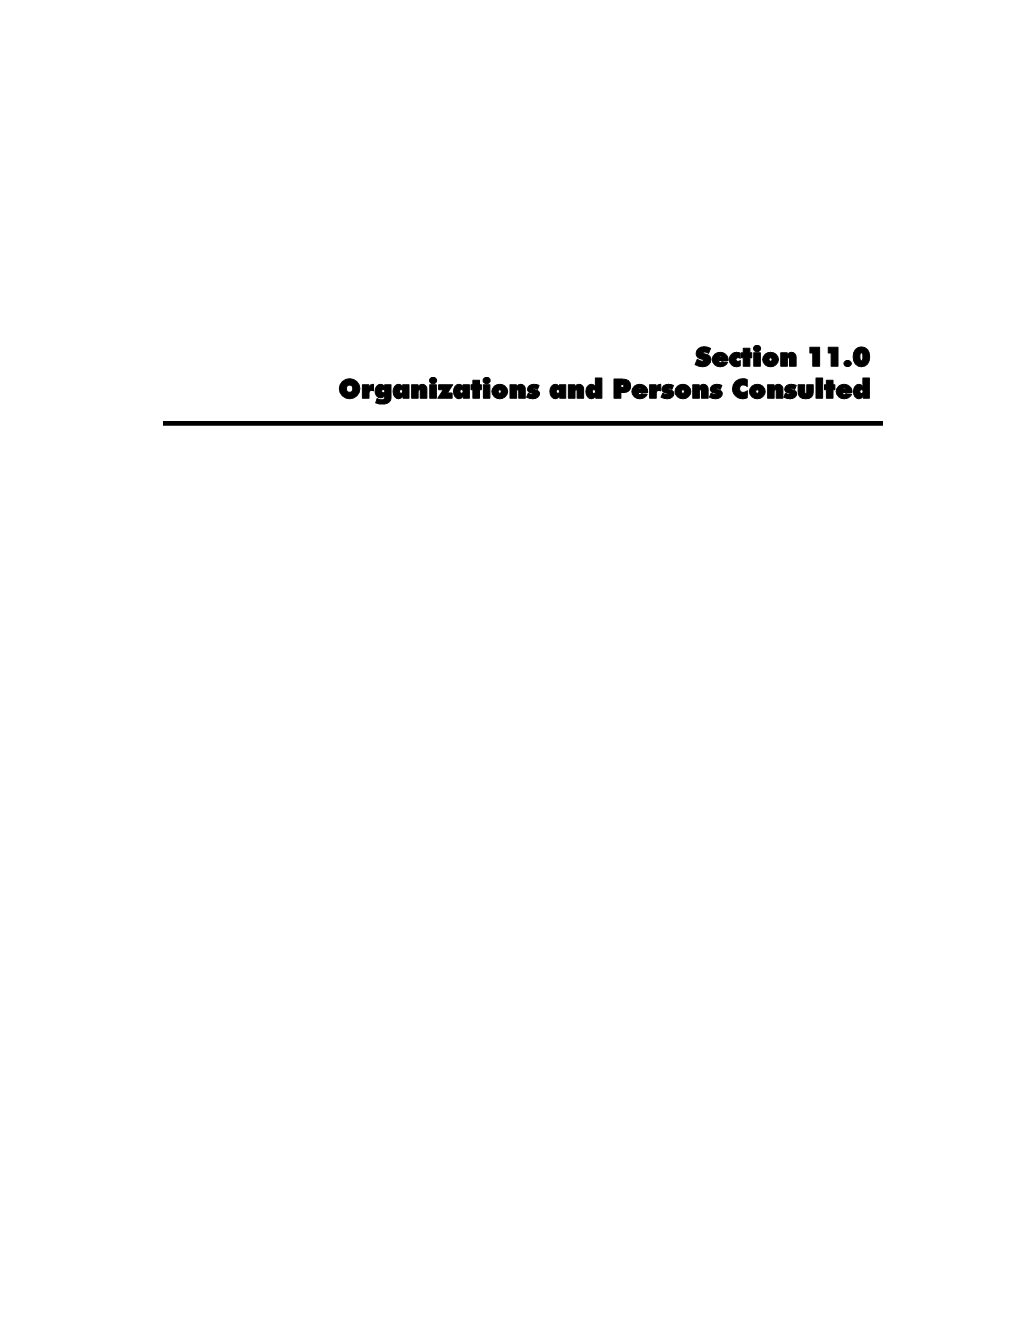 Organizations and Persons Consulted